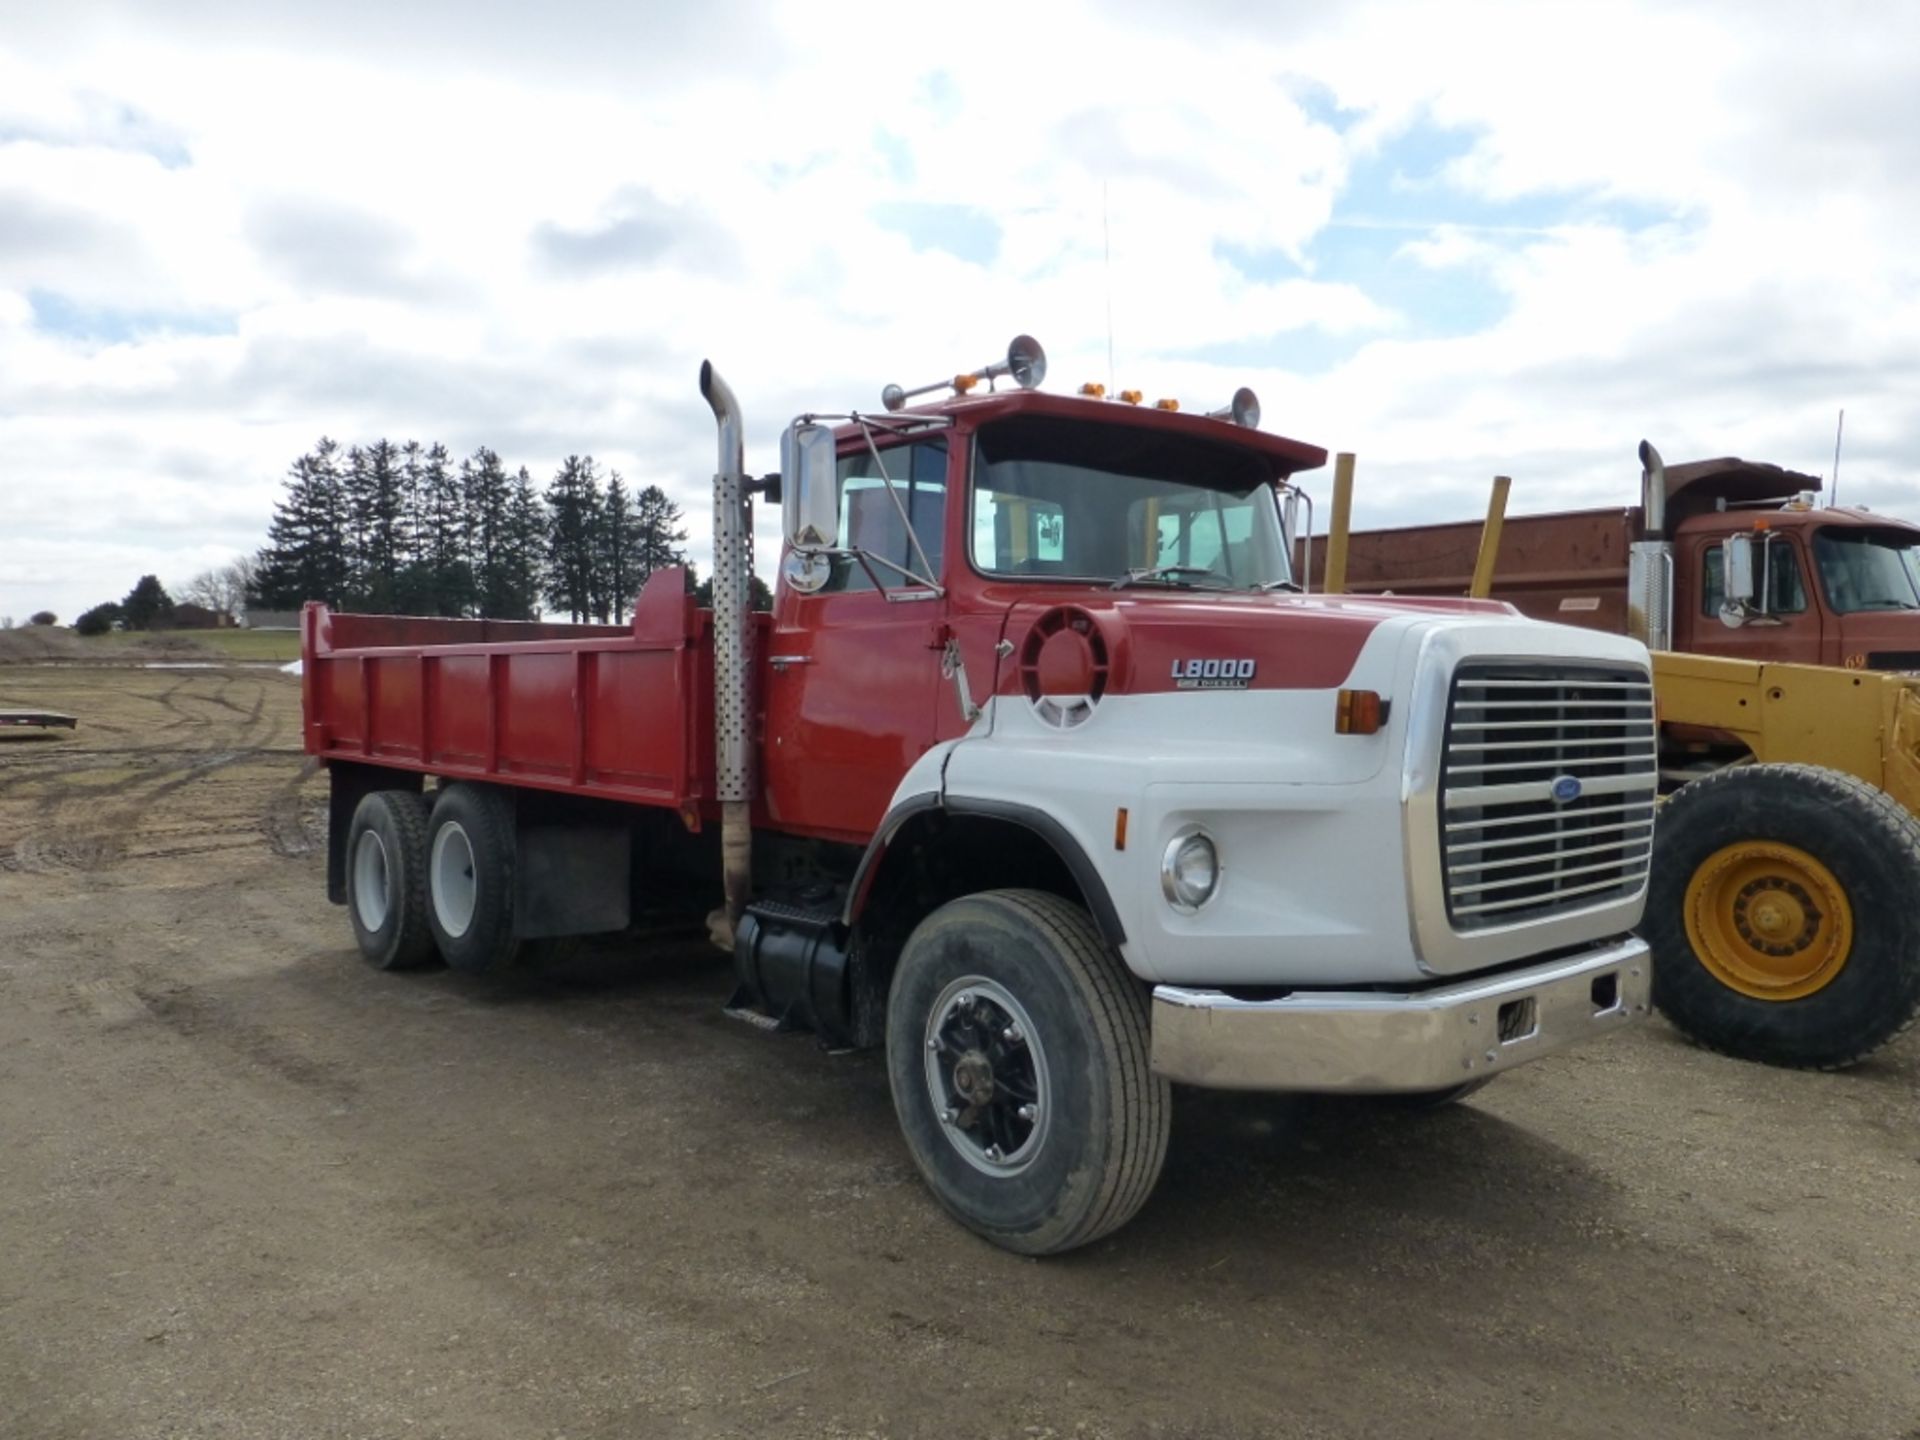 1984 Ford L8000 - Image 7 of 29